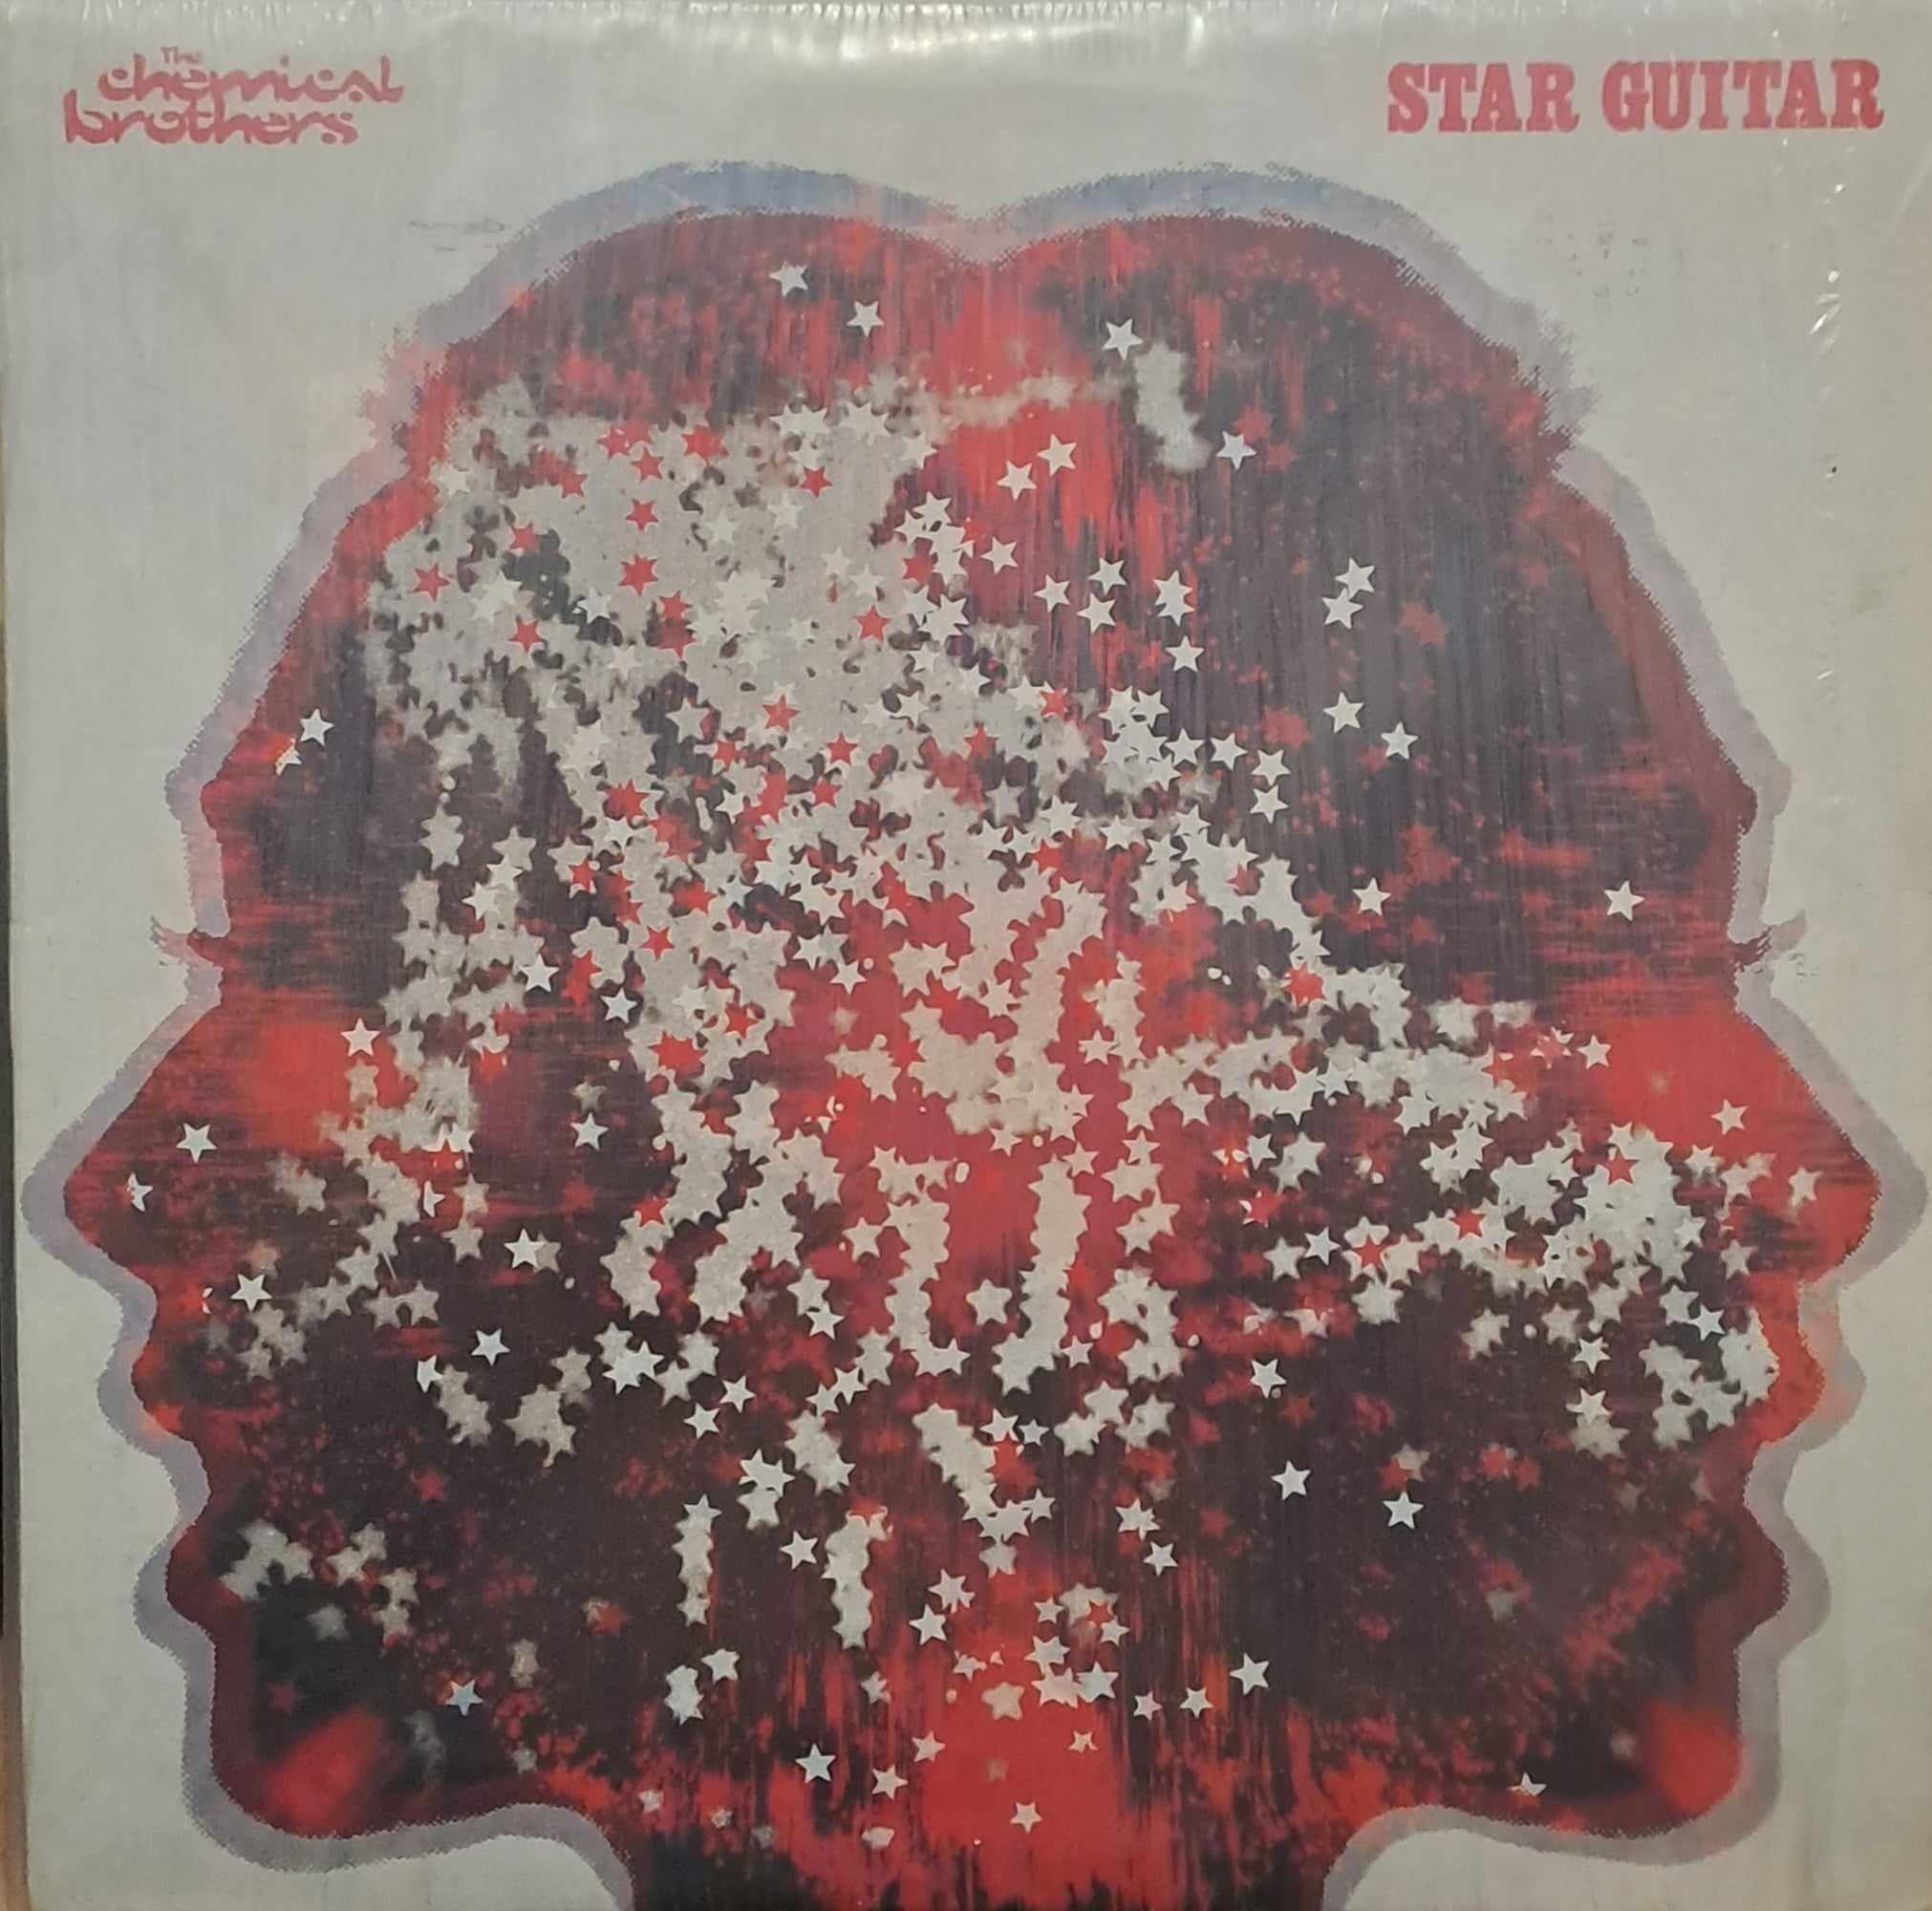 The Chemical Brothers – Star Guitar - vinyle electro